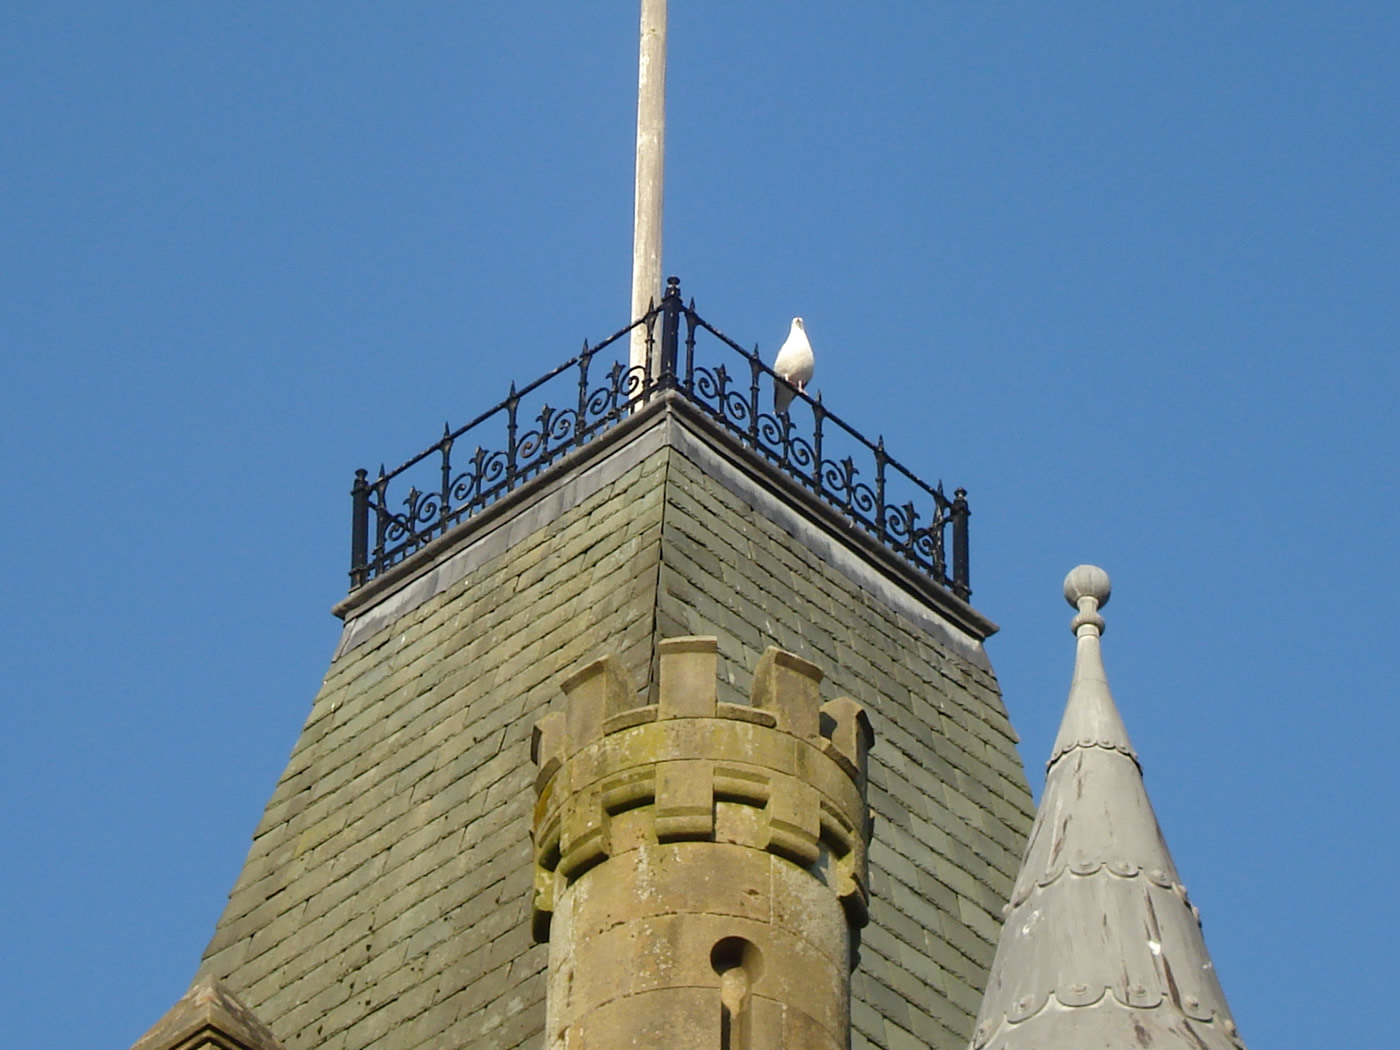 A seagull perched on the railing atop the tower of Victoria Halls, Helensburgh